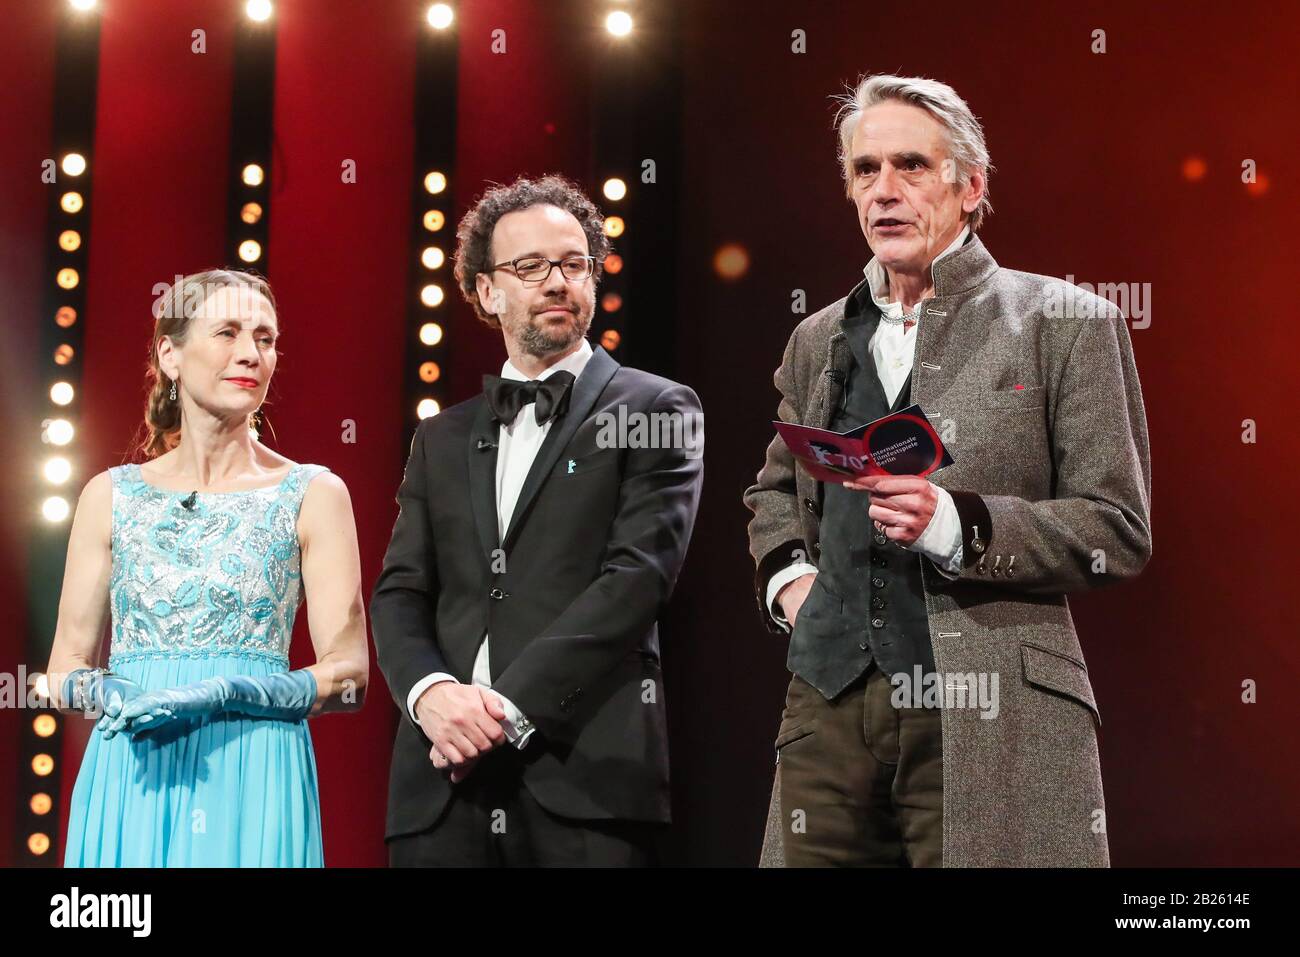 Berlin, Germany. 29th Feb, 2020. President of the International Jury Jeremy Irons (R) announces the winner of the Golden Bear for Best Film with Berlinale Executive Director Mariette Rissenbeek (L) and Berlinale Artistic Director Carlo Chatrian standing aside during the awards ceremony of 70th Berlin International Film Festival in Berlin, capital of Germany, Feb. 29, 2020. Credit: Shan Yuqi/Xinhua/Alamy Live News Stock Photo